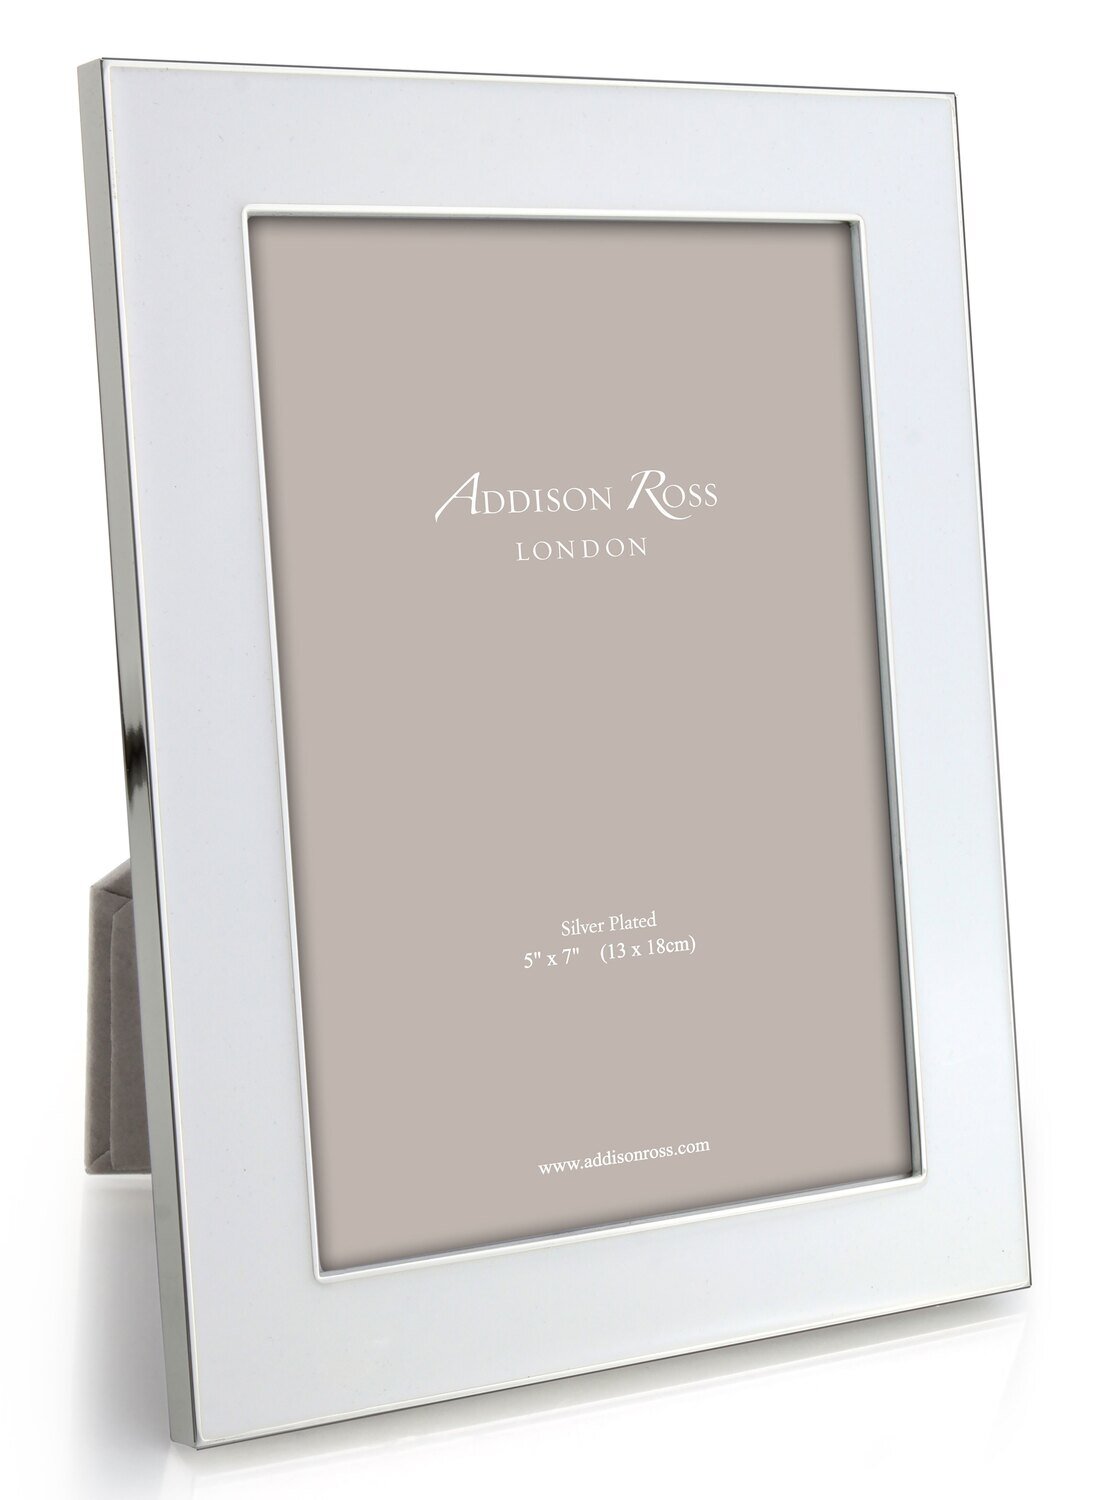 Addison Ross 4 x 6 Inch 24mm White Enamel Picture Frame Silver Plate FR0905